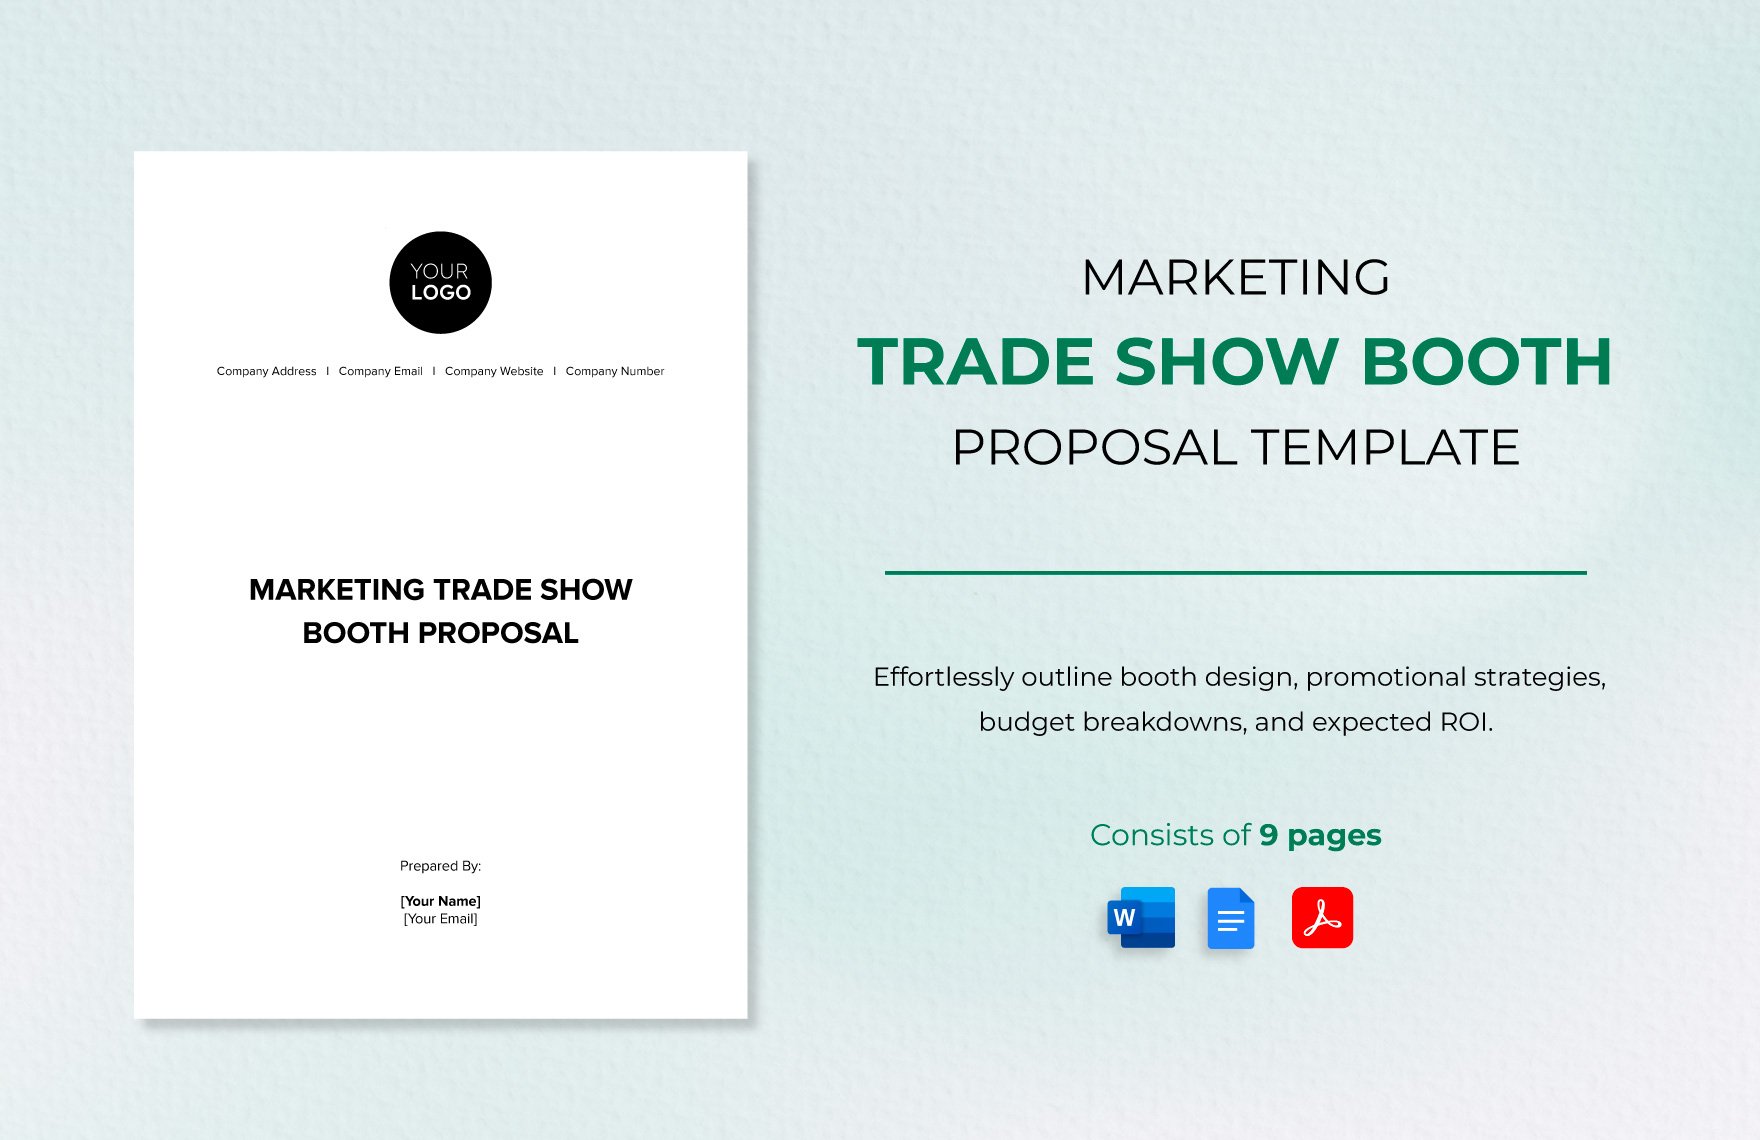 Marketing Trade Show Booth Proposal Template in Word, Google Docs, PDF